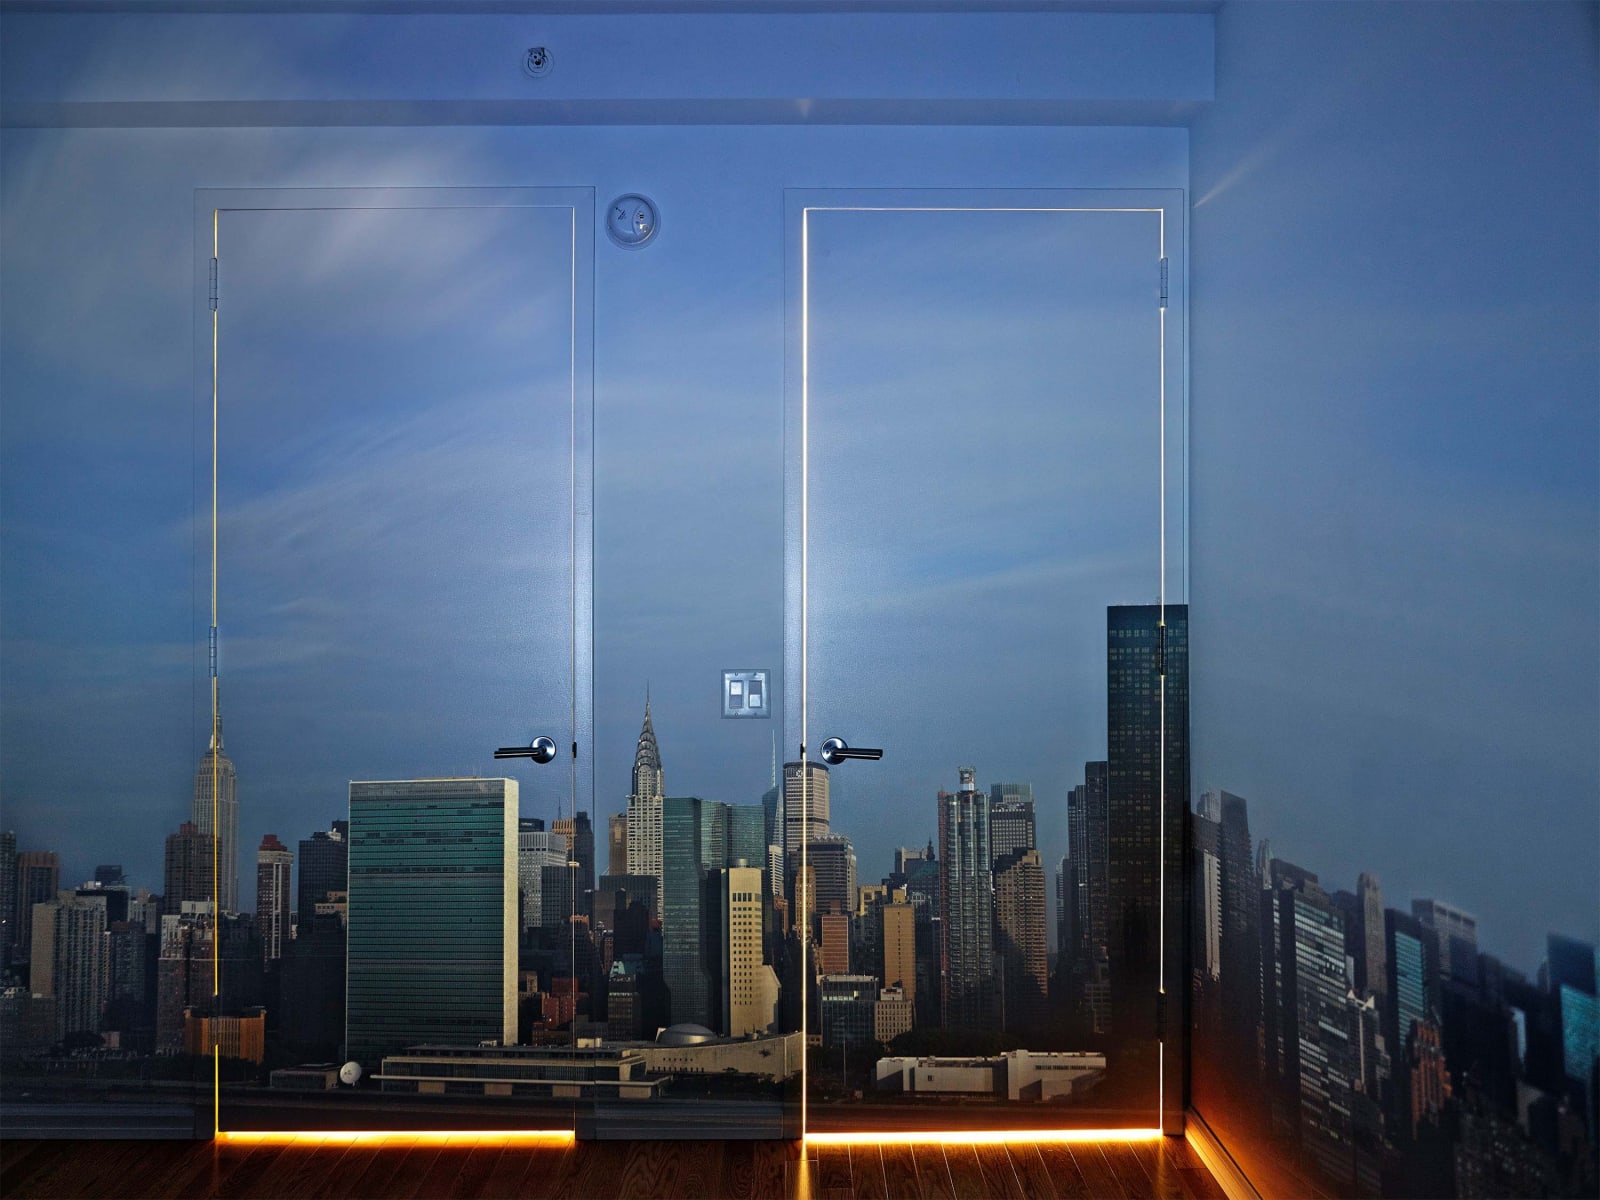 Abelardo Morell Camera Obscura Early Morning View of the East Side of Midtown Manhattan skyline projected in empty room with two doors